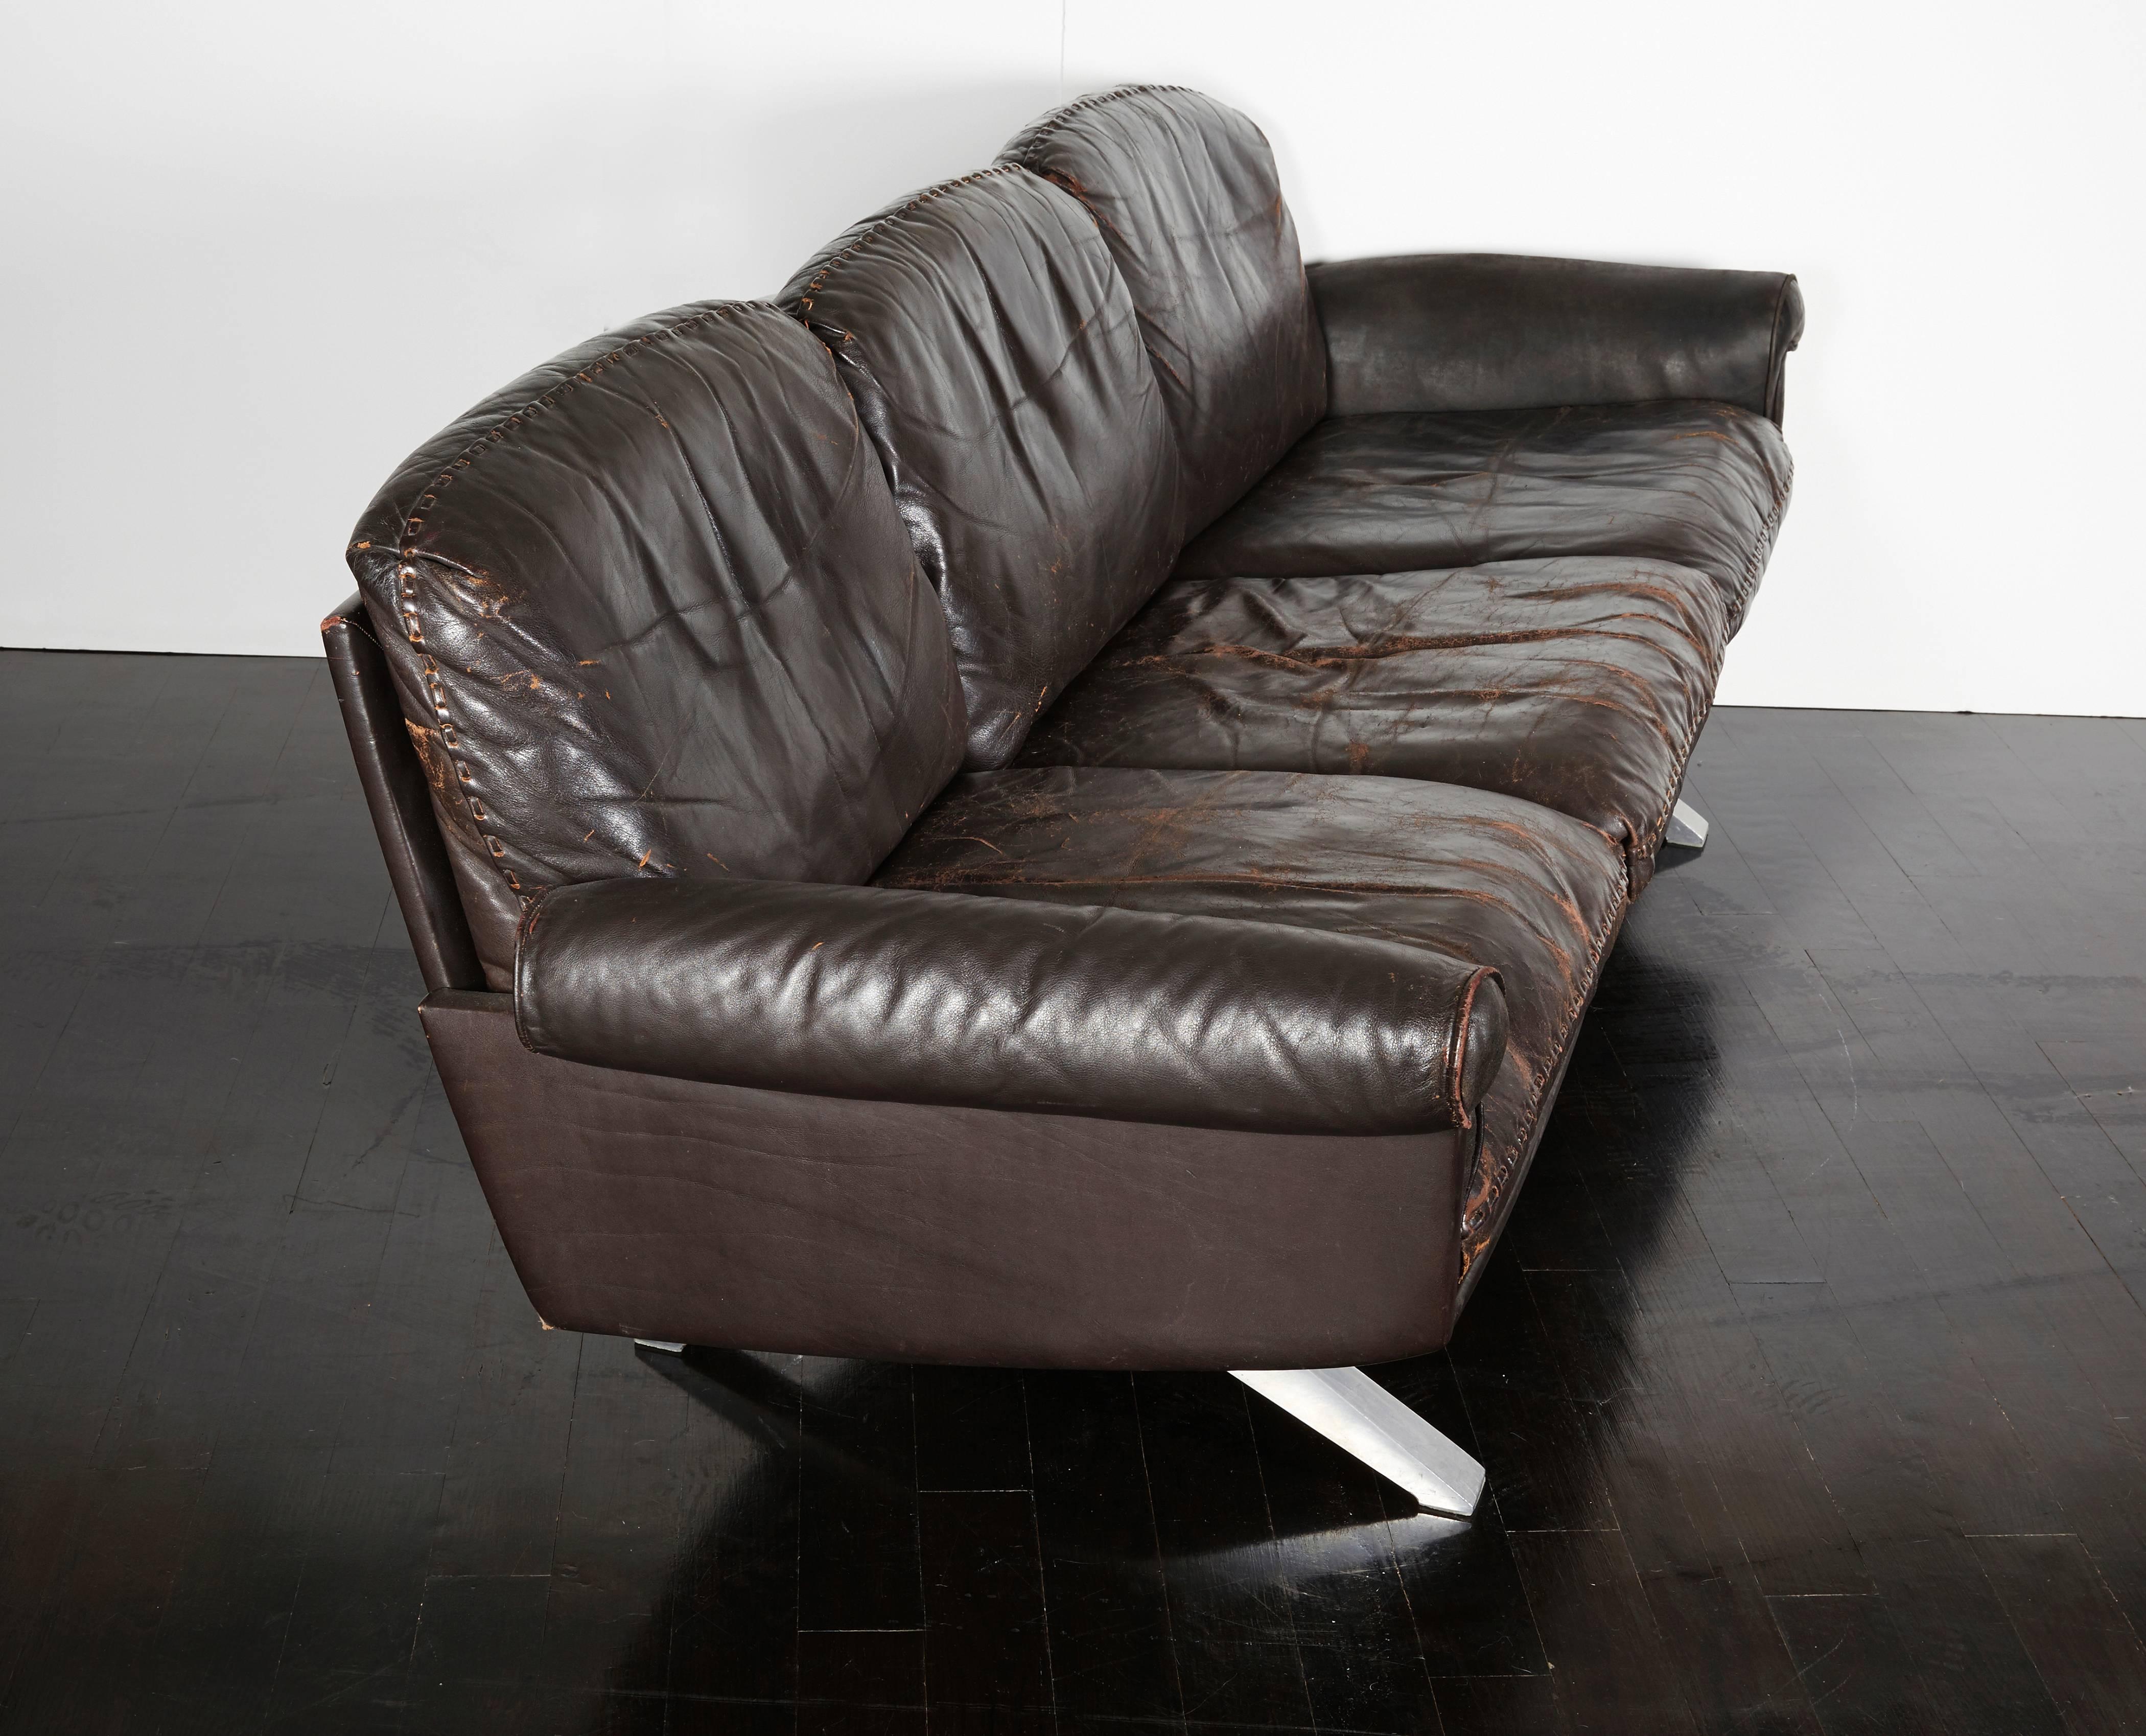 De Sede Leather Sofa In Excellent Condition For Sale In New York, NY